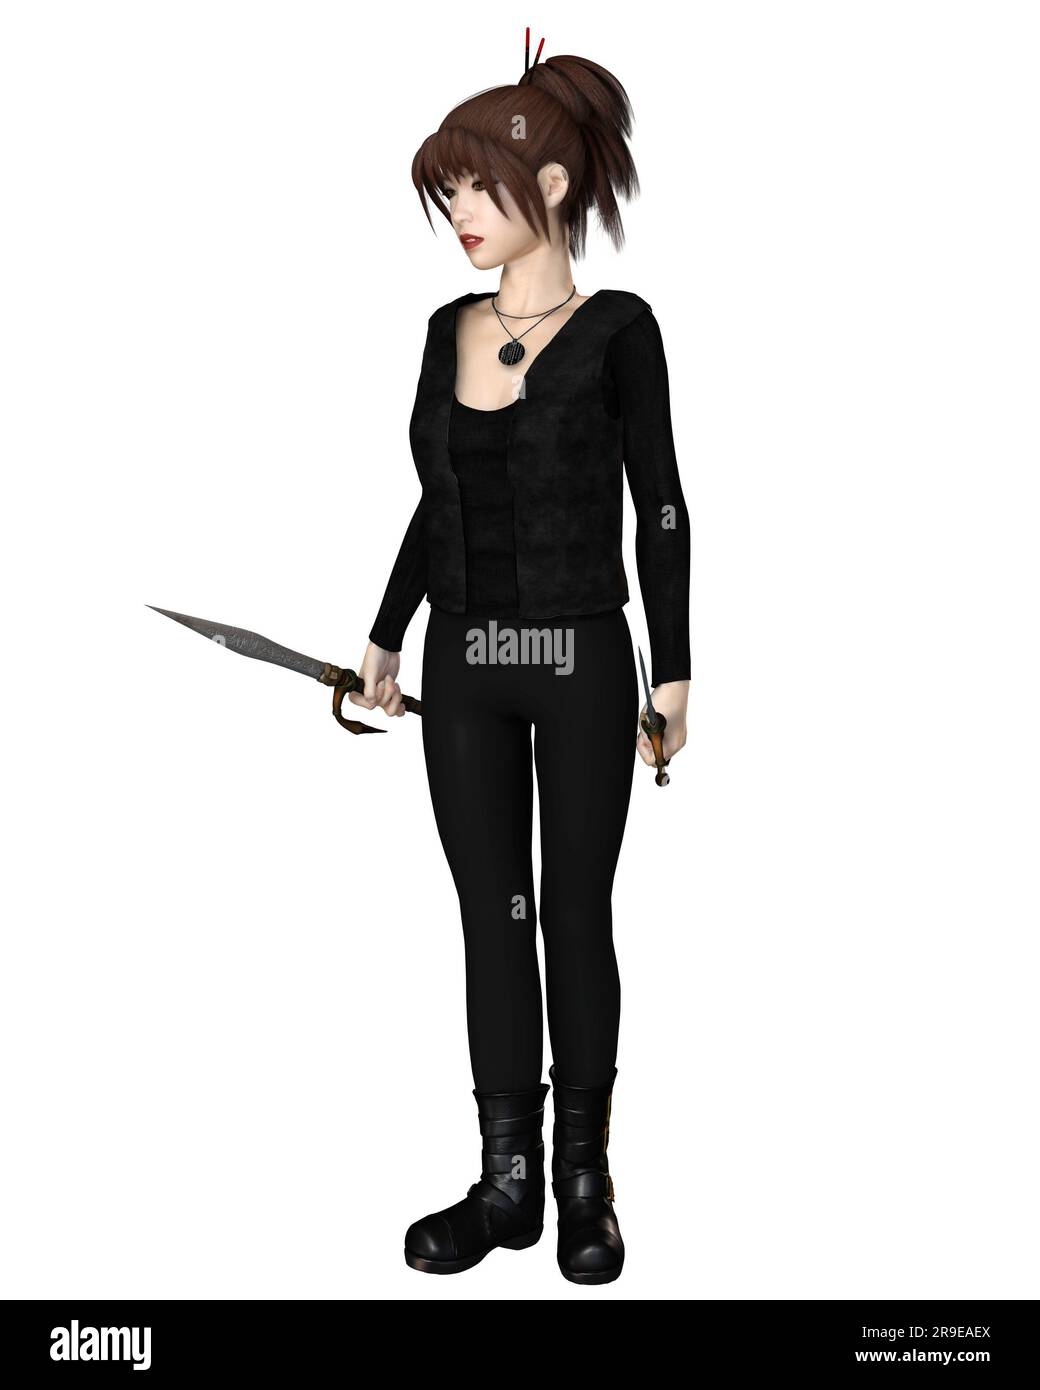 Female Asian Assassin with Swords, Standing Stock Photo